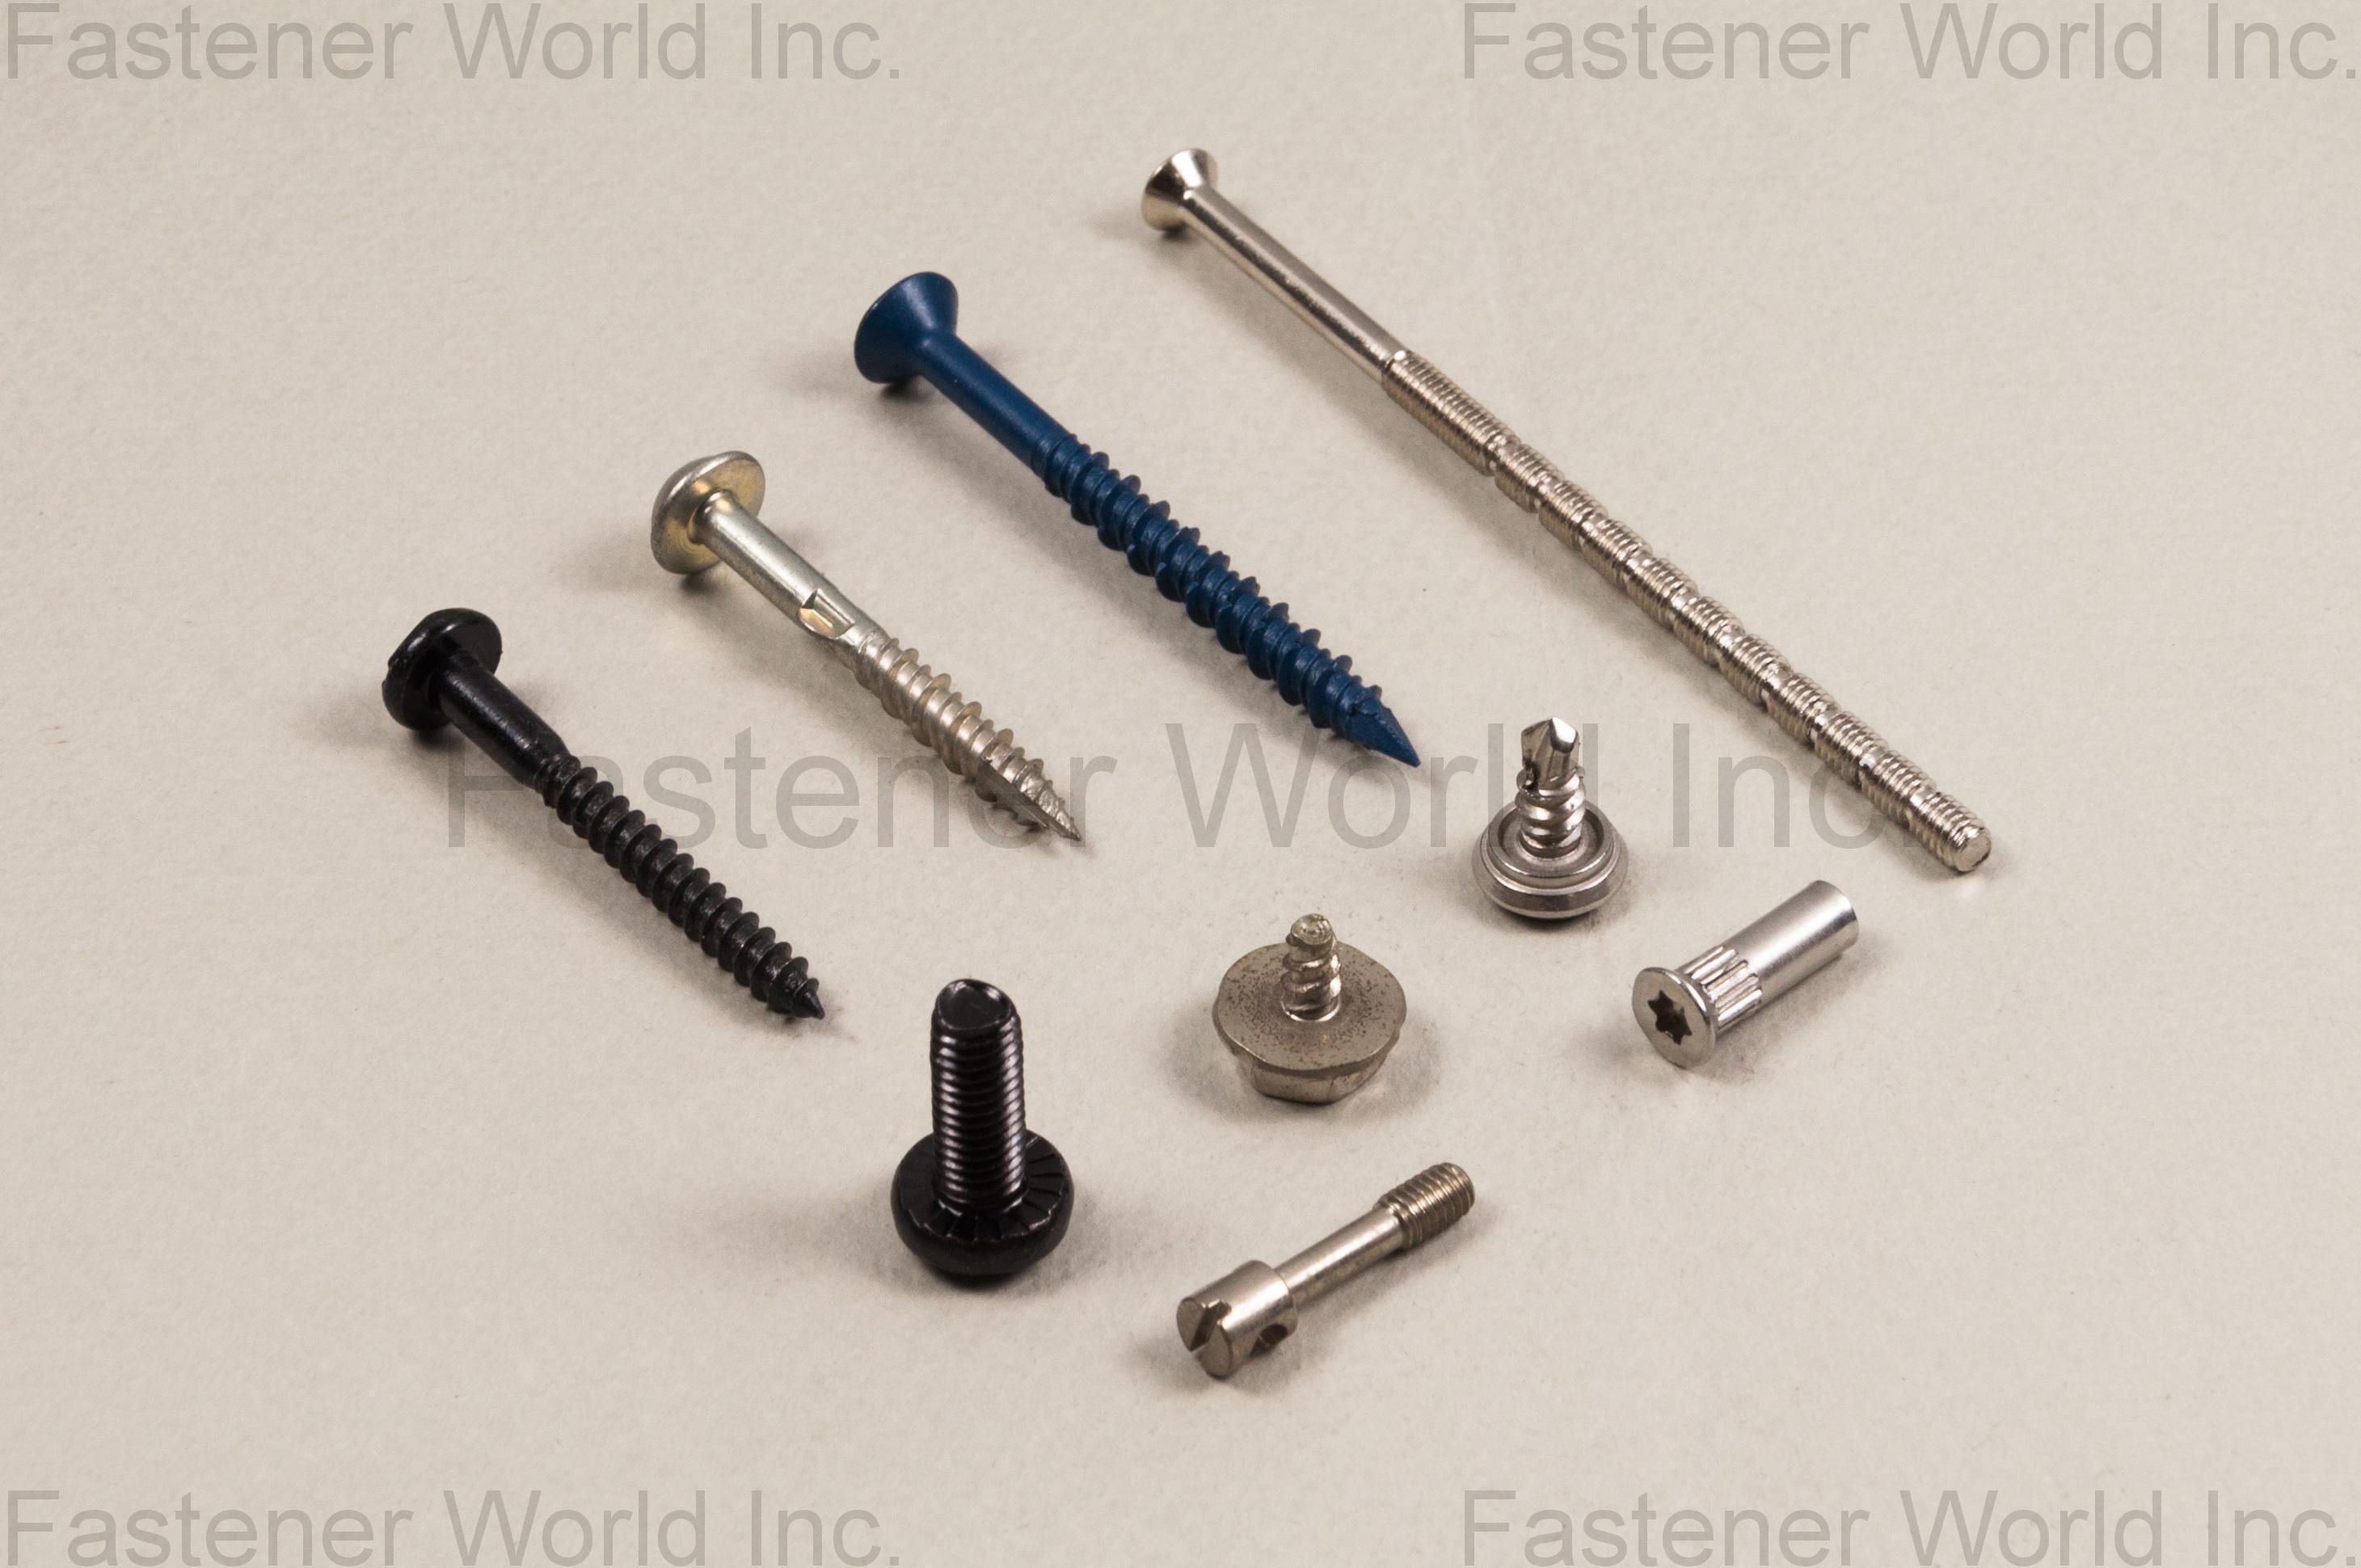 YING YI CO., LTD. , Special TS & MS , Special Screws